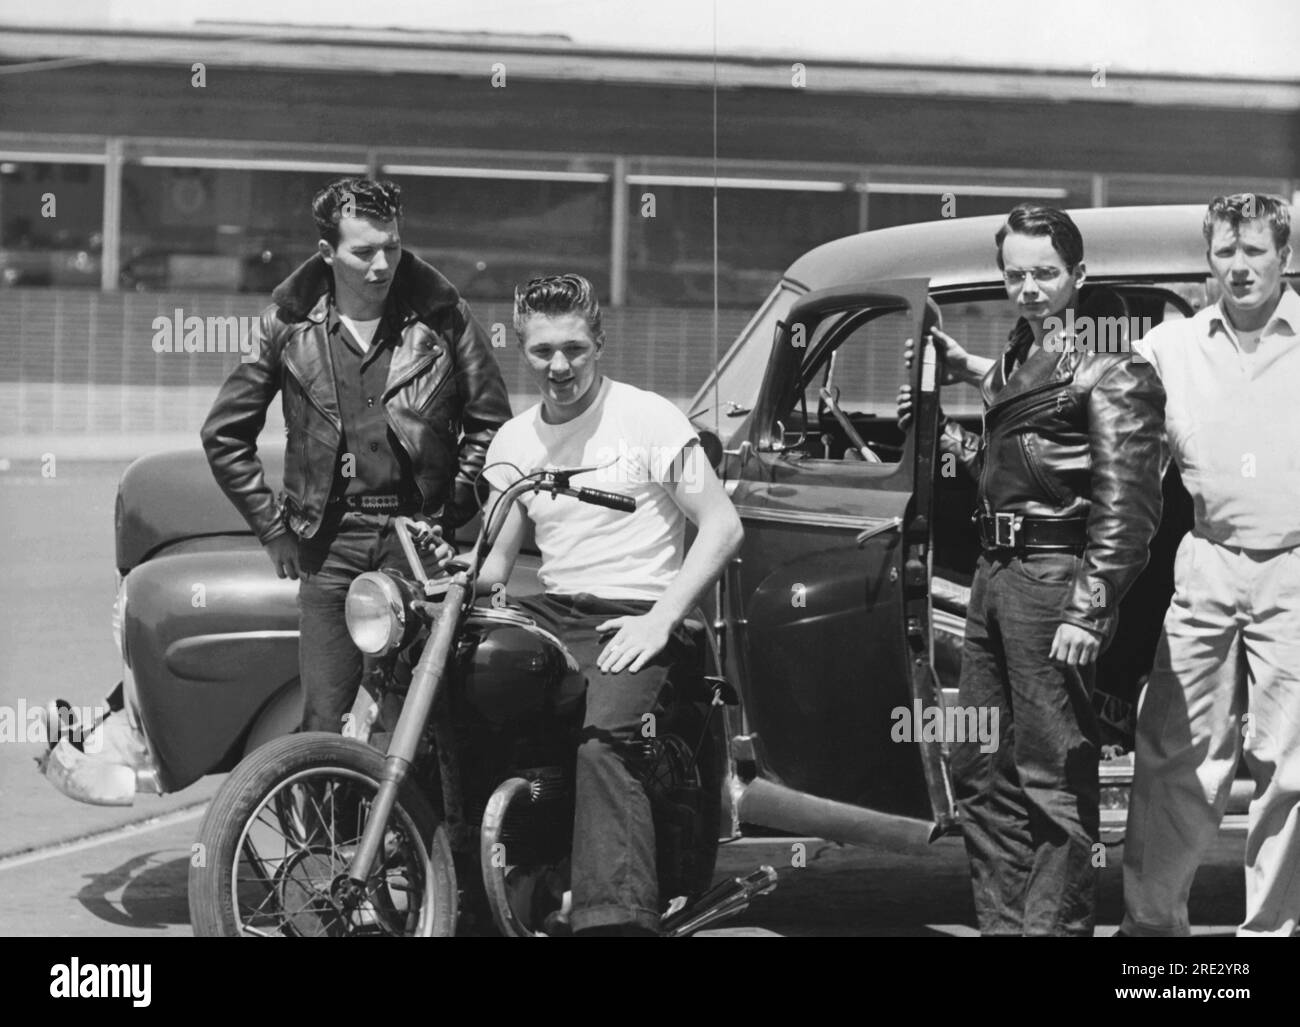 San Francisco, California  c. 1954 Four tough looking teenage youths with ducktail haircuts, leather jackets, and a motorcycle hanging out in a parking lot. Stock Photo